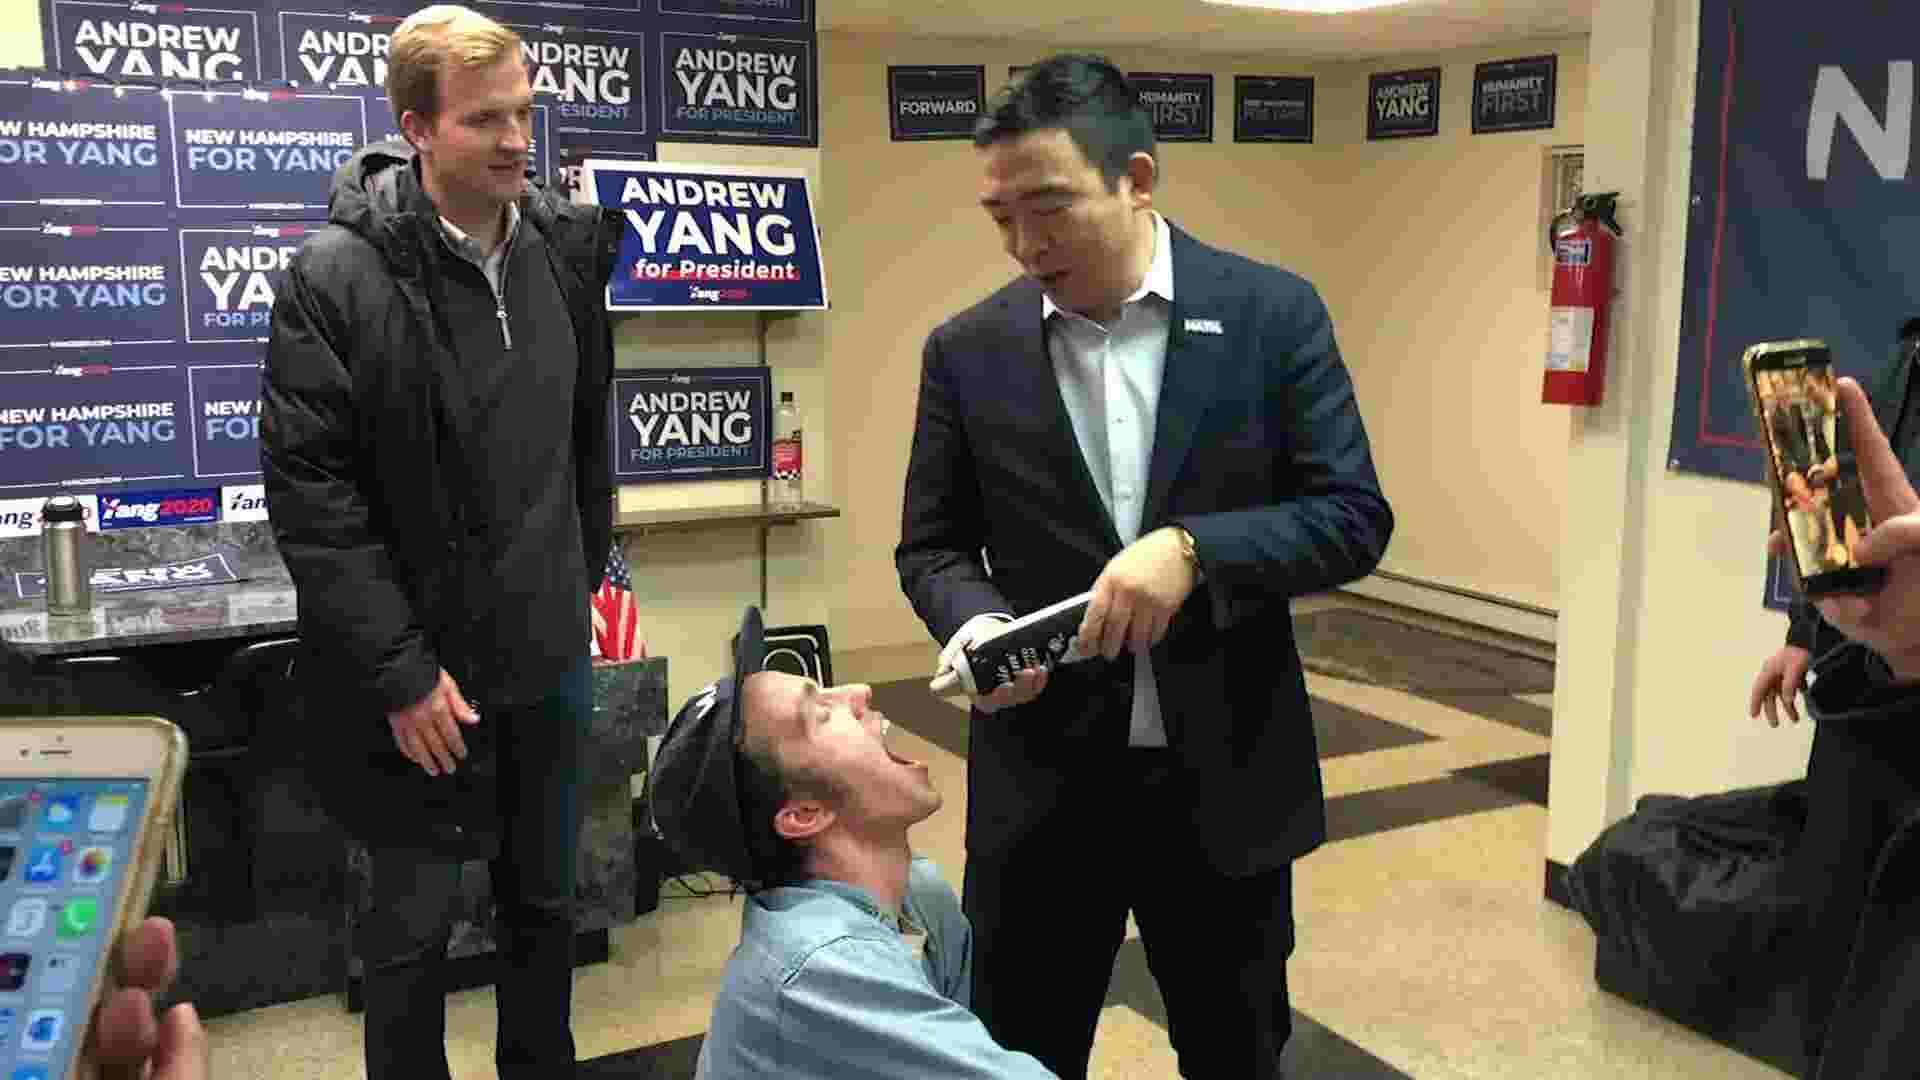 Yang Sprays Supporters With Whipped Cream